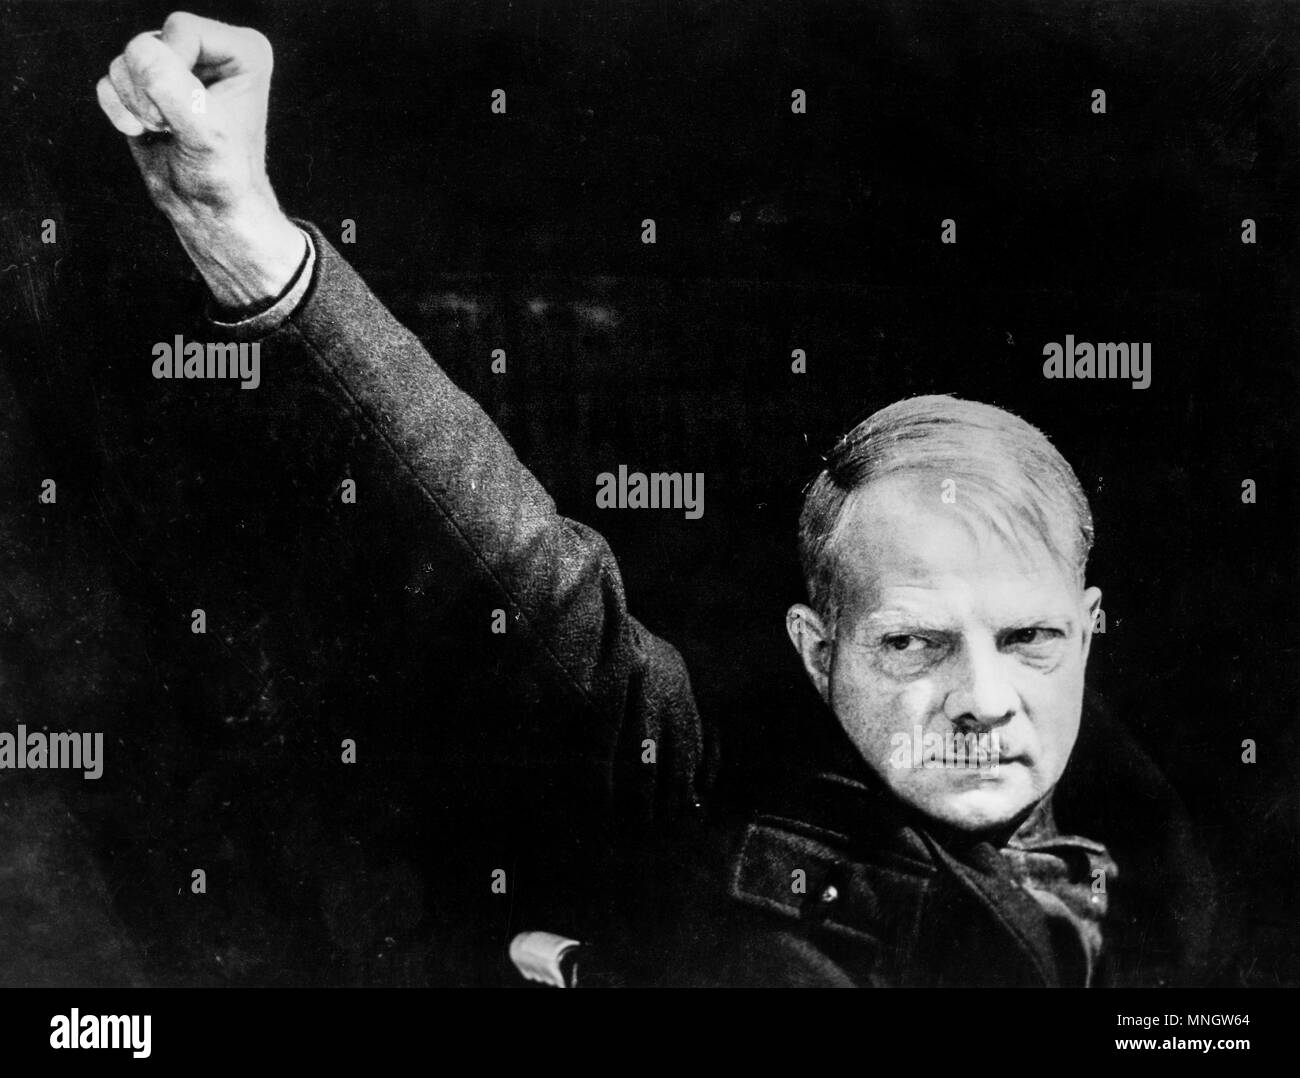 peter arne will appear as adolf hitler, 1962 Stock Photo